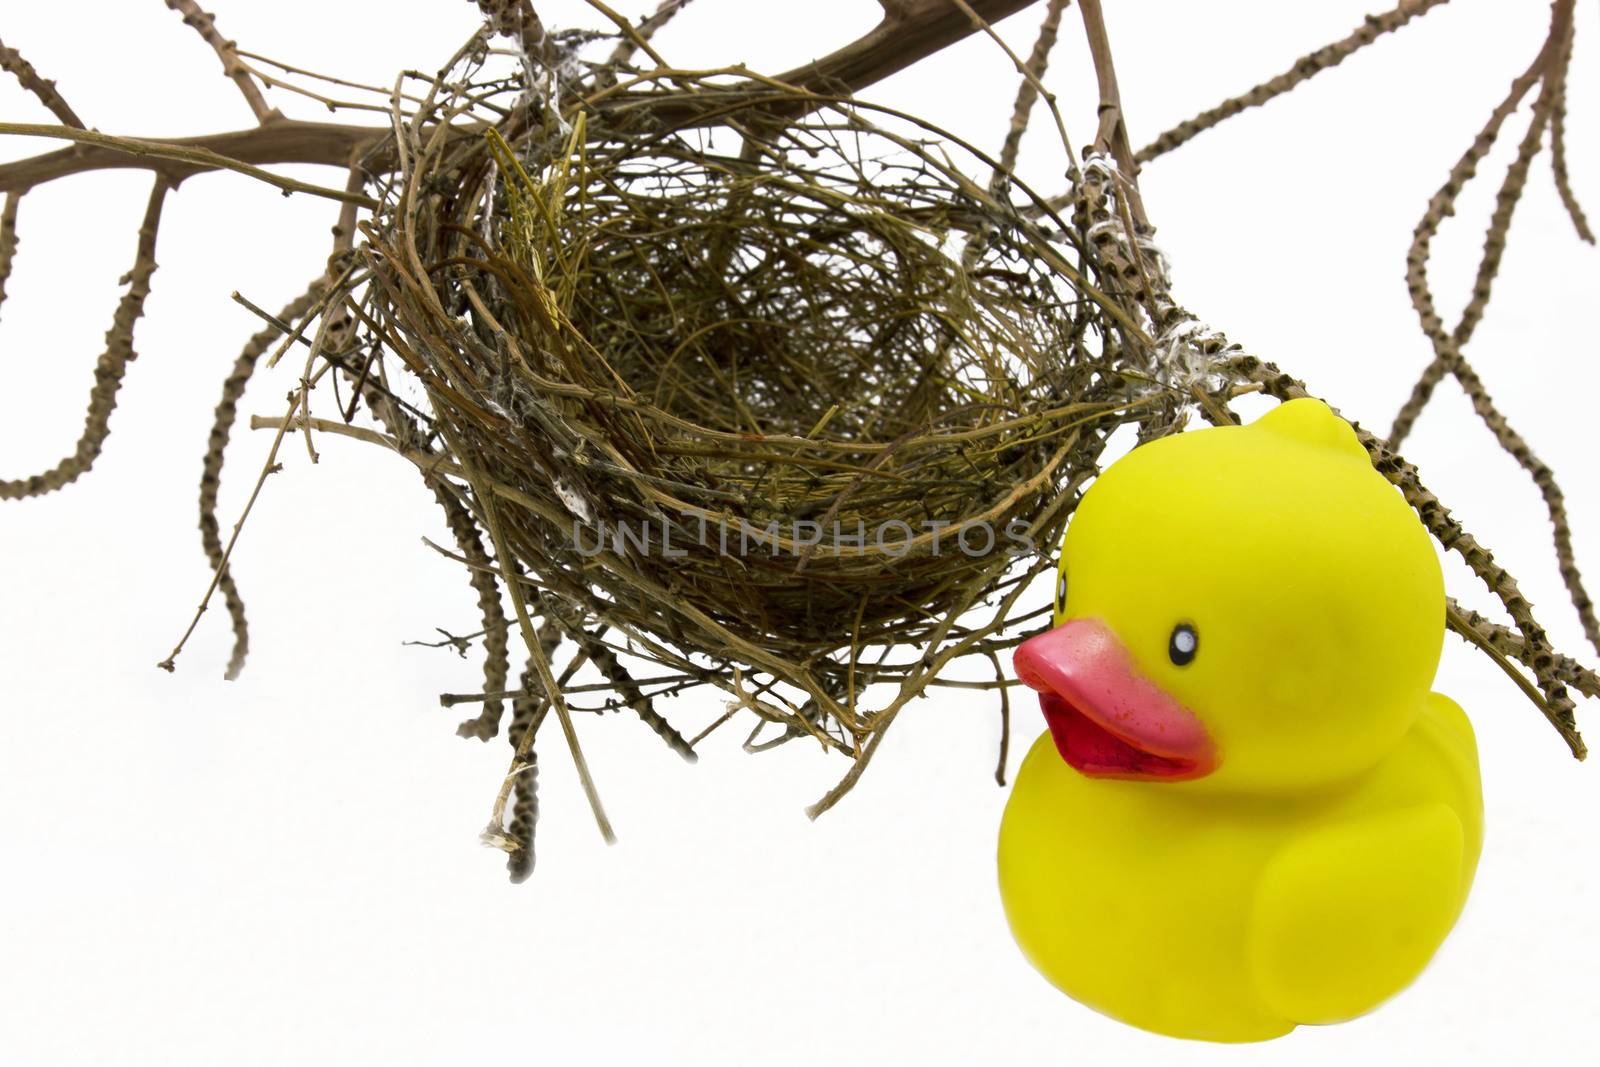 Nest and Yellow toy duckling on white background by sutipp11